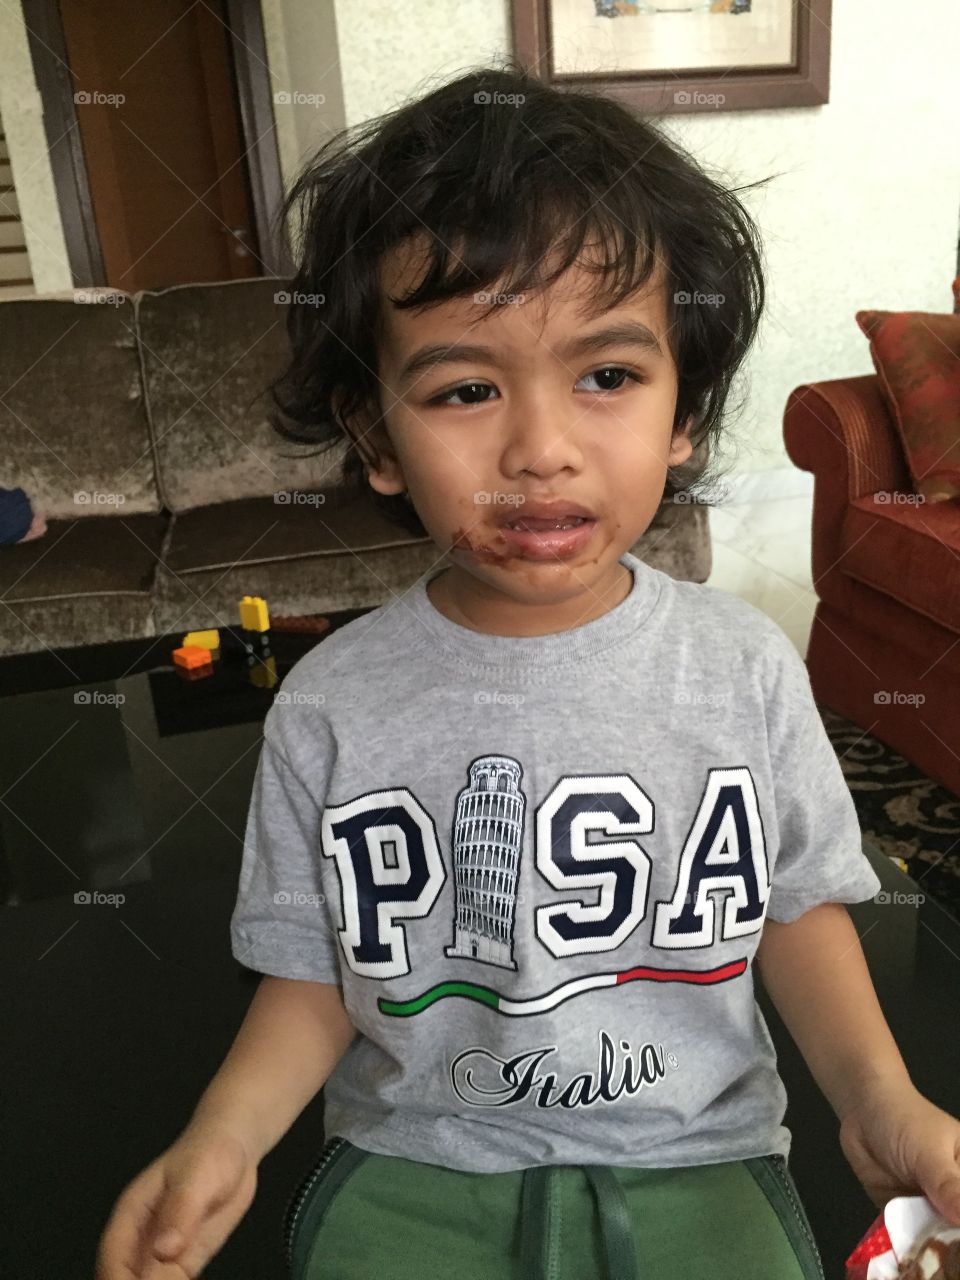 Little boy grumpy and upset got chocolate all over his face 